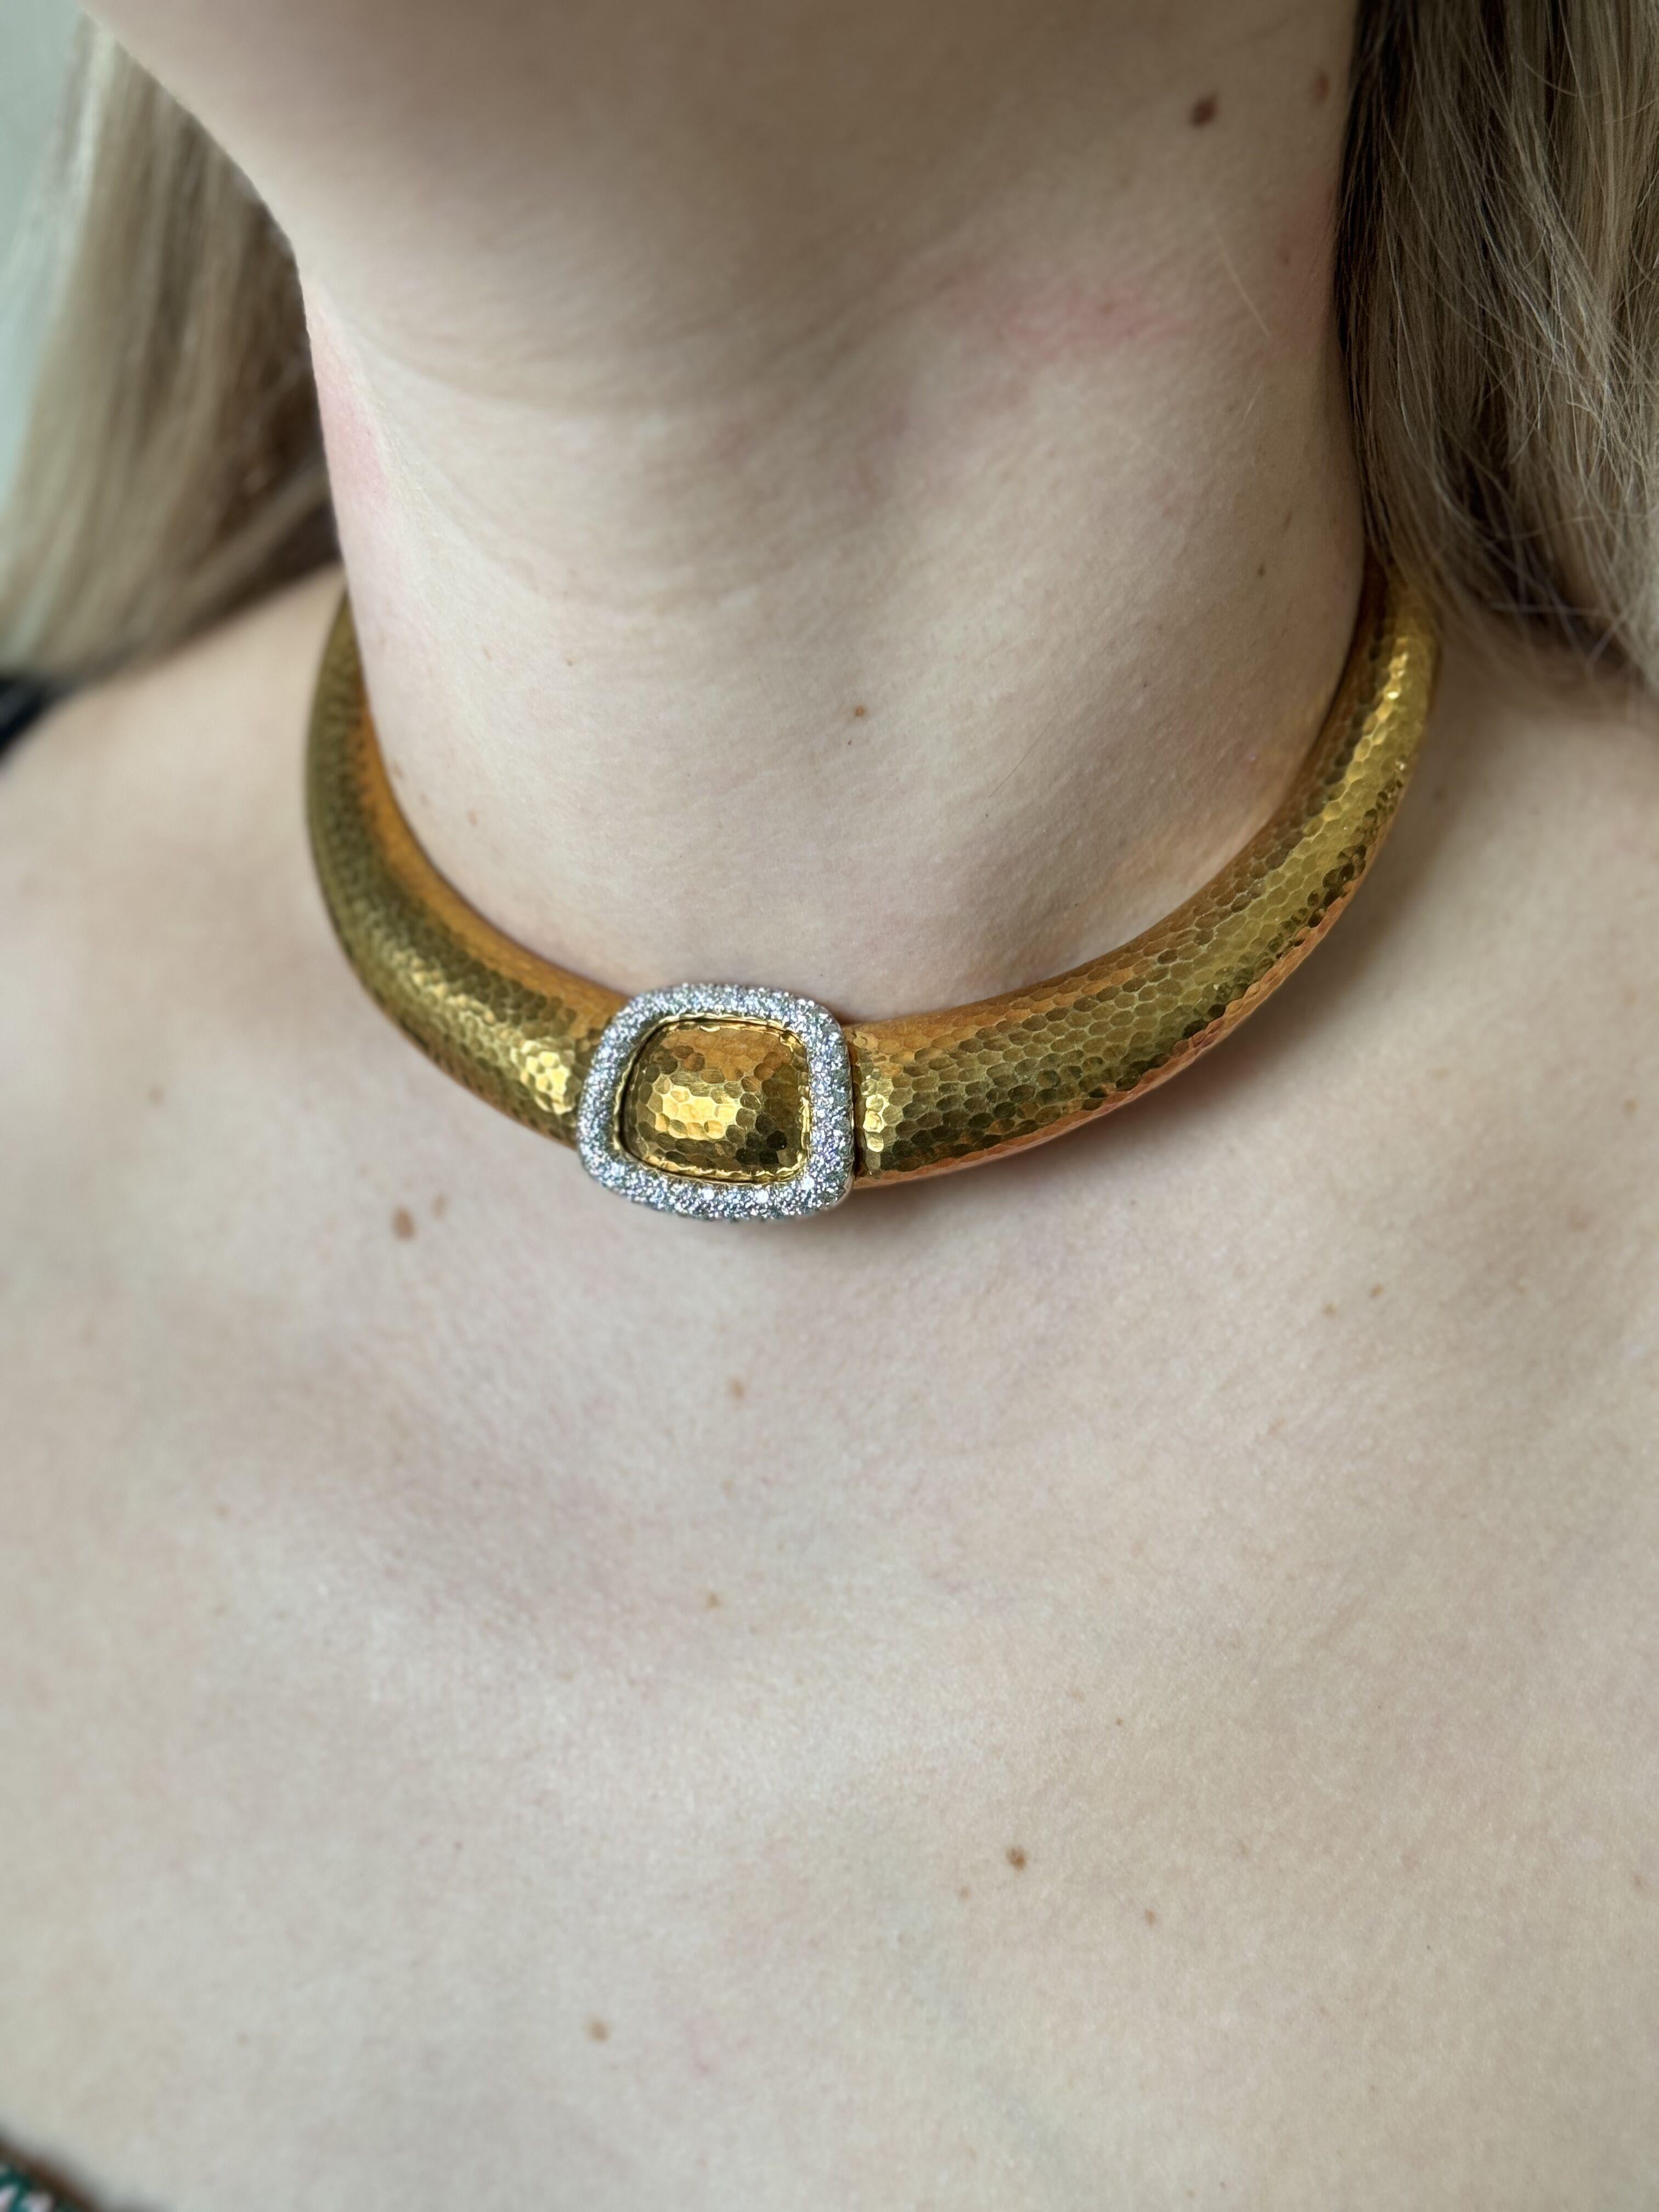 1970s vintage 18k hand hammered collar necklace by Andrew Clunn, featuring center diamond set buckle design - diamonds approx. 3.00ctw G/VS, in platinum. The necklace will fit an average 13-14